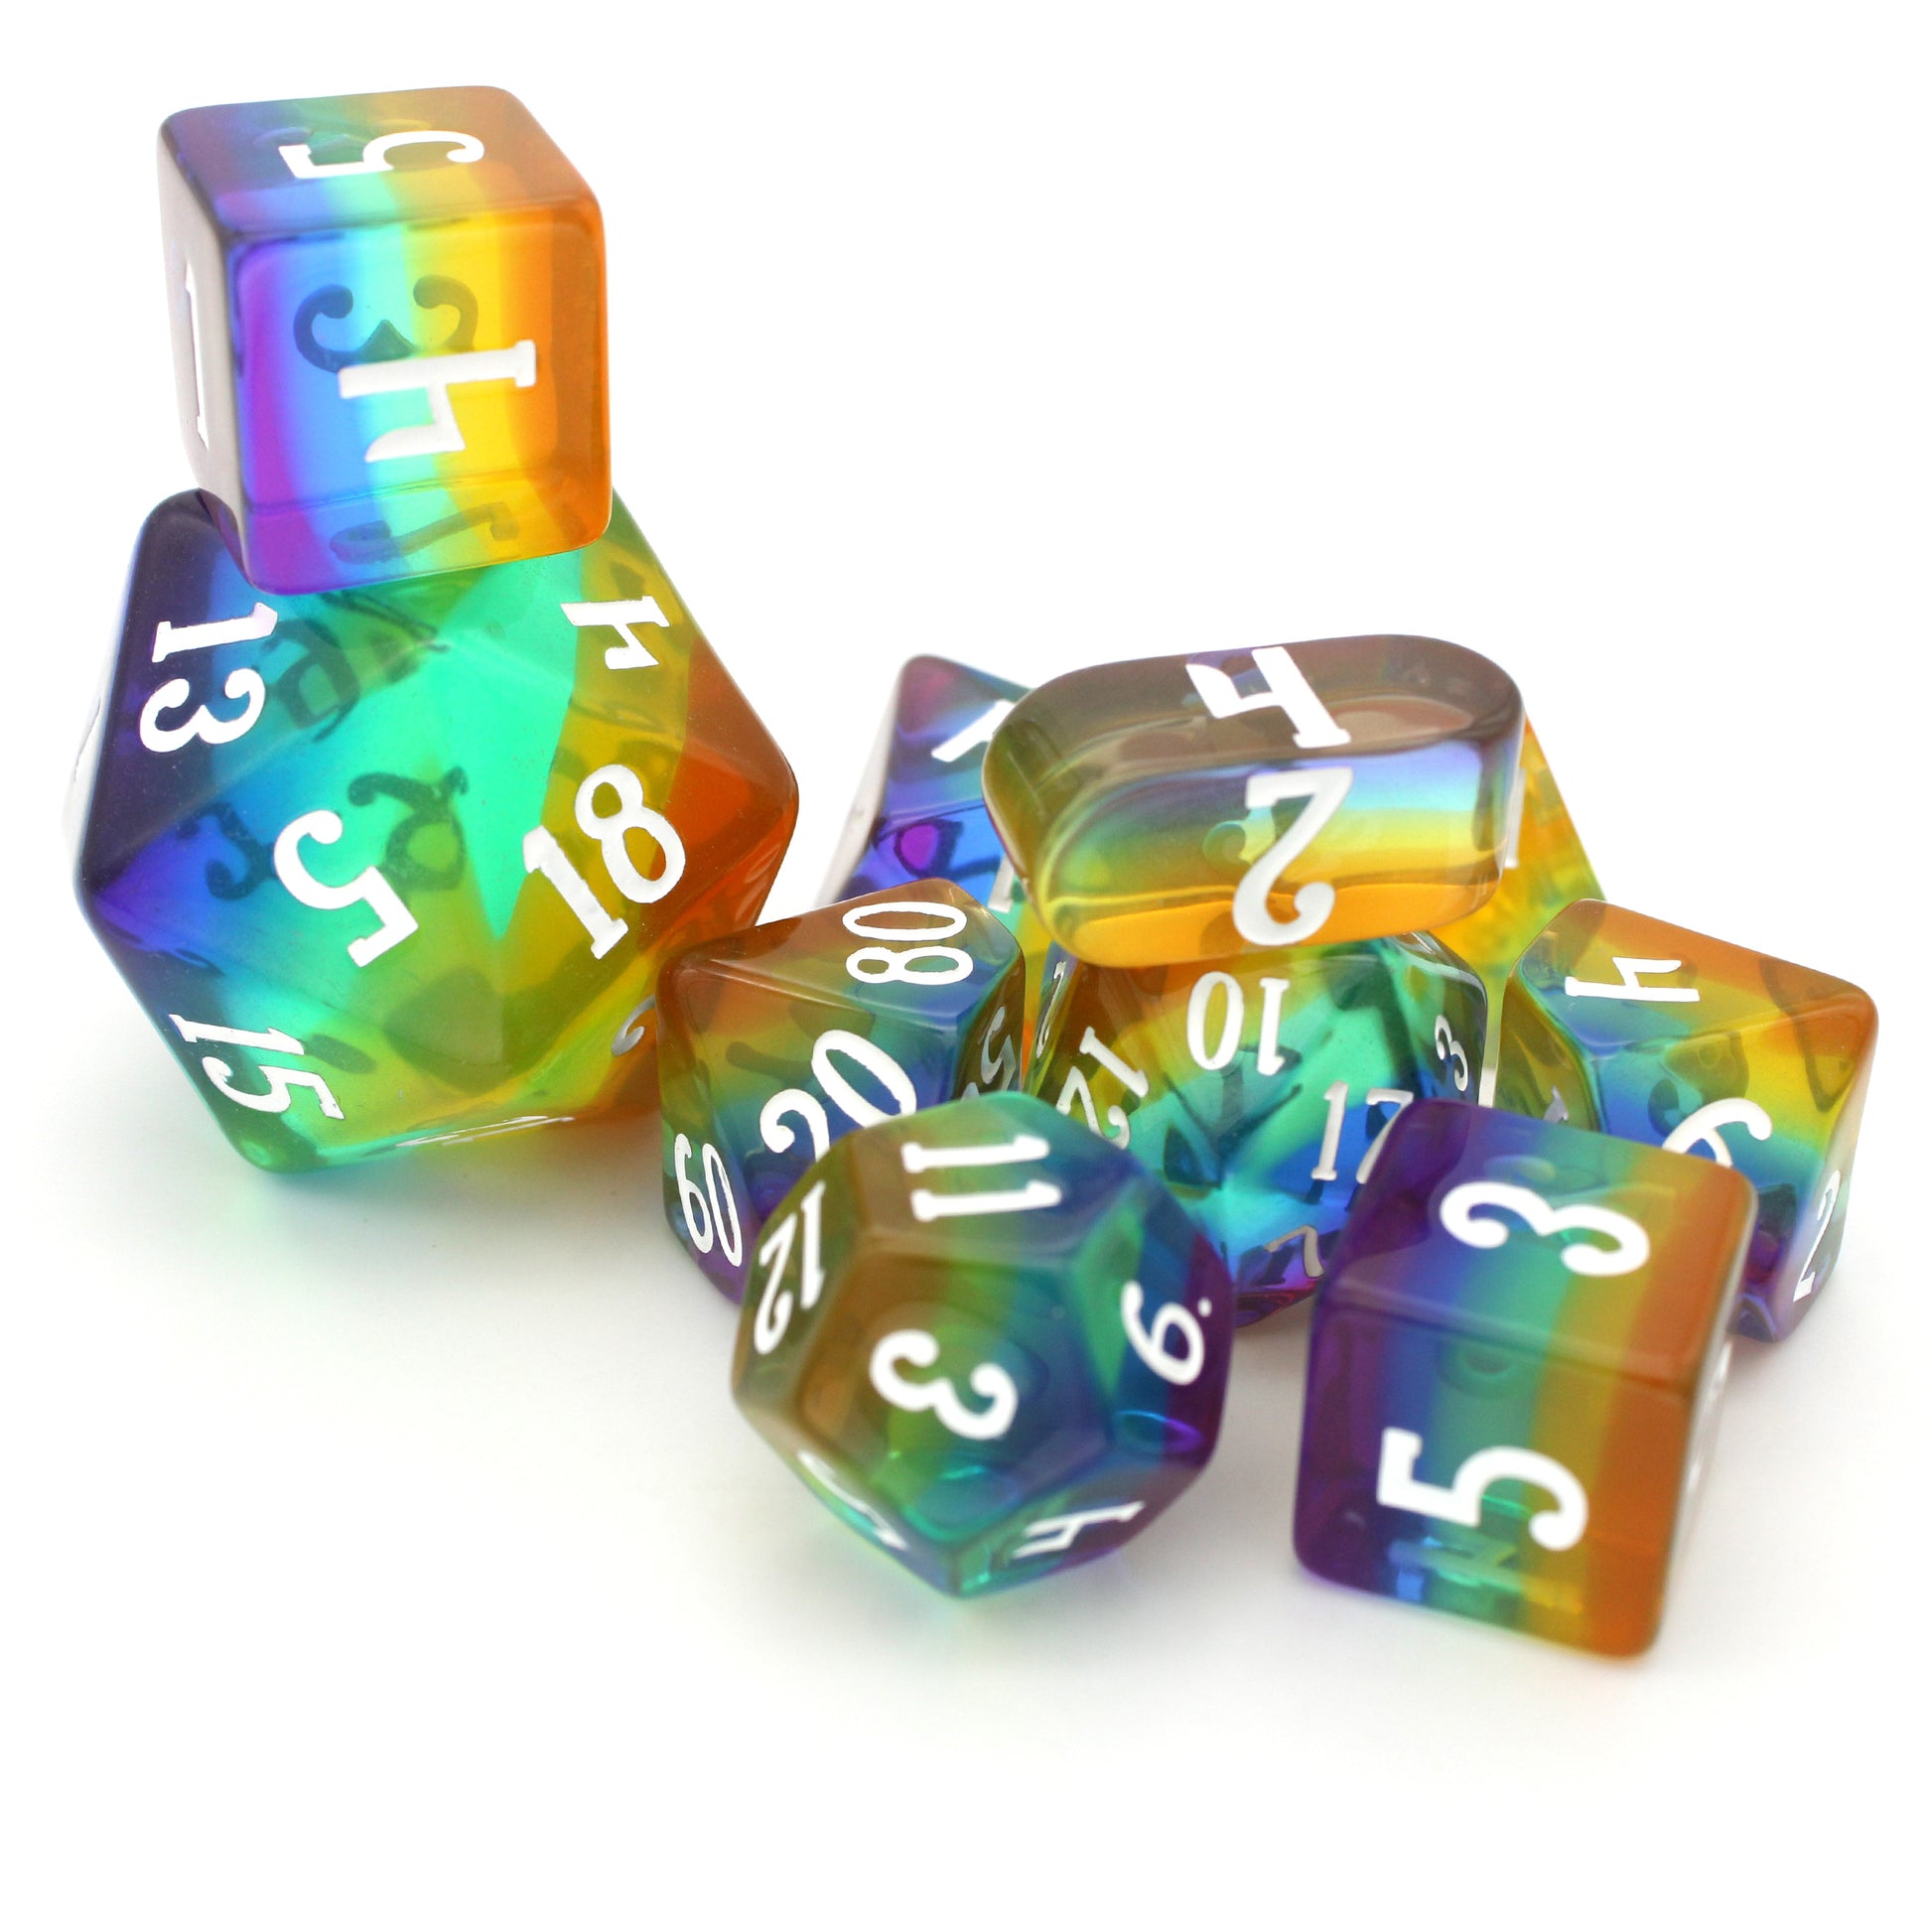 Rainbow is a 10-piece set of translucent multicolored resin dice.